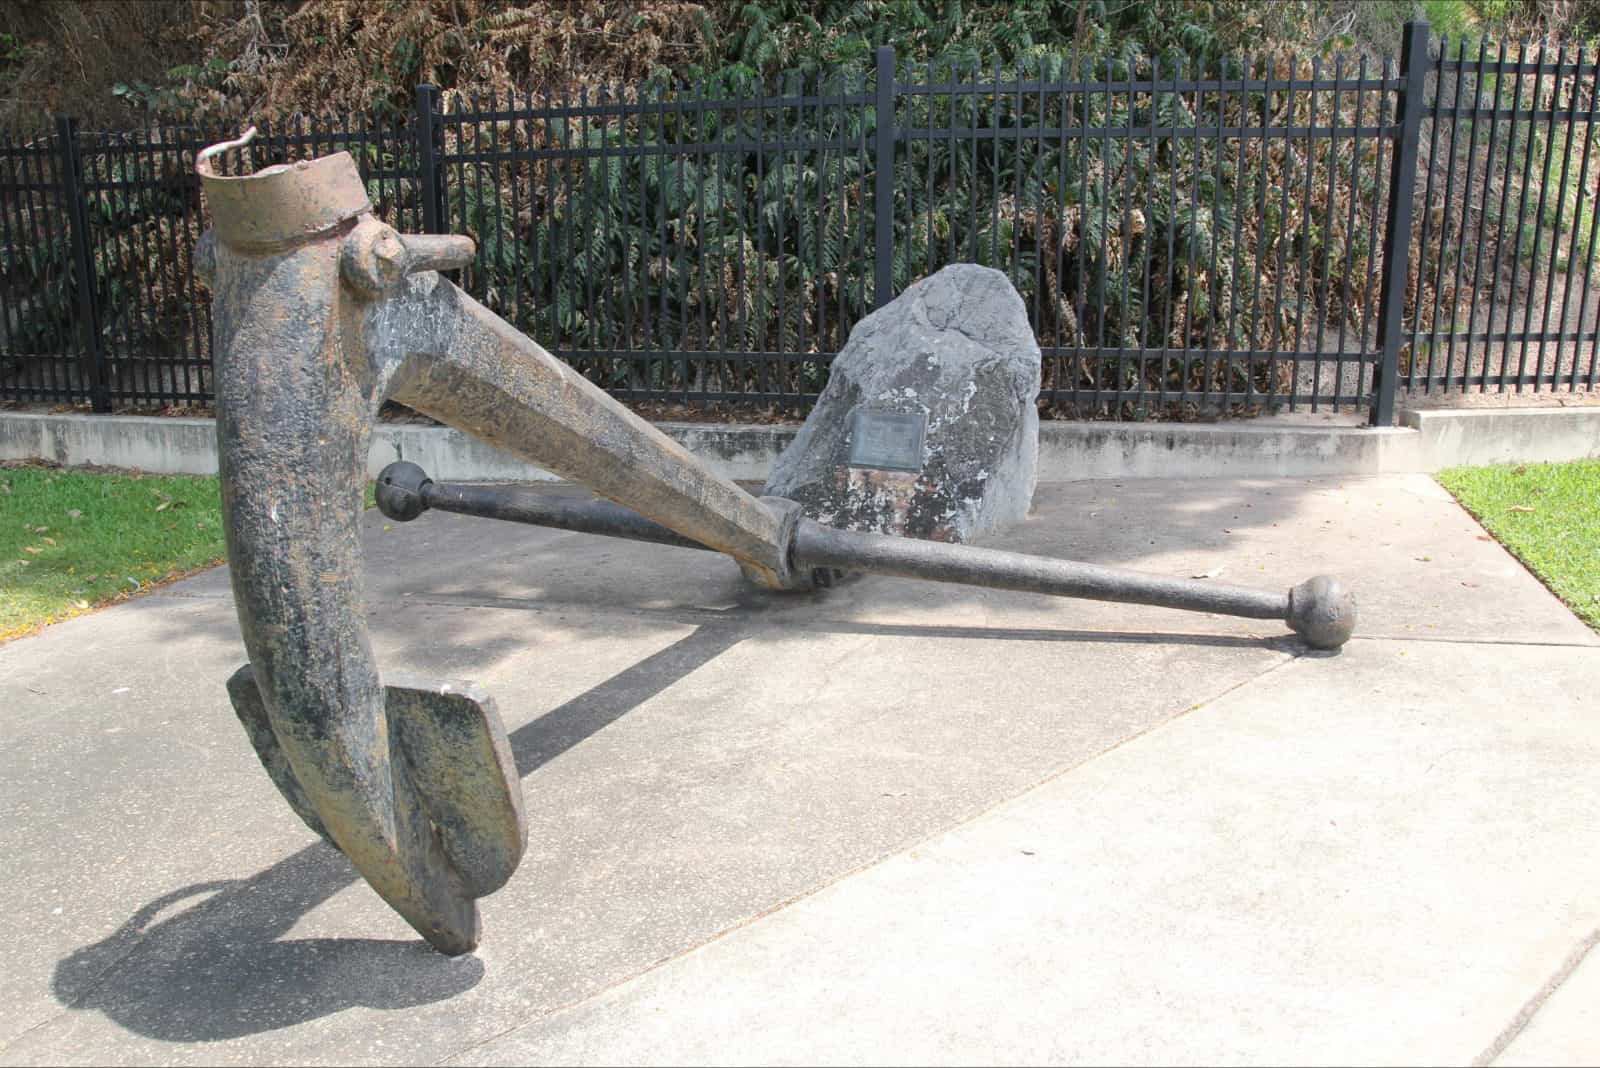 This 19th Century one-arm admiralty inter-tidal anchor is opposite Goyder's Park.